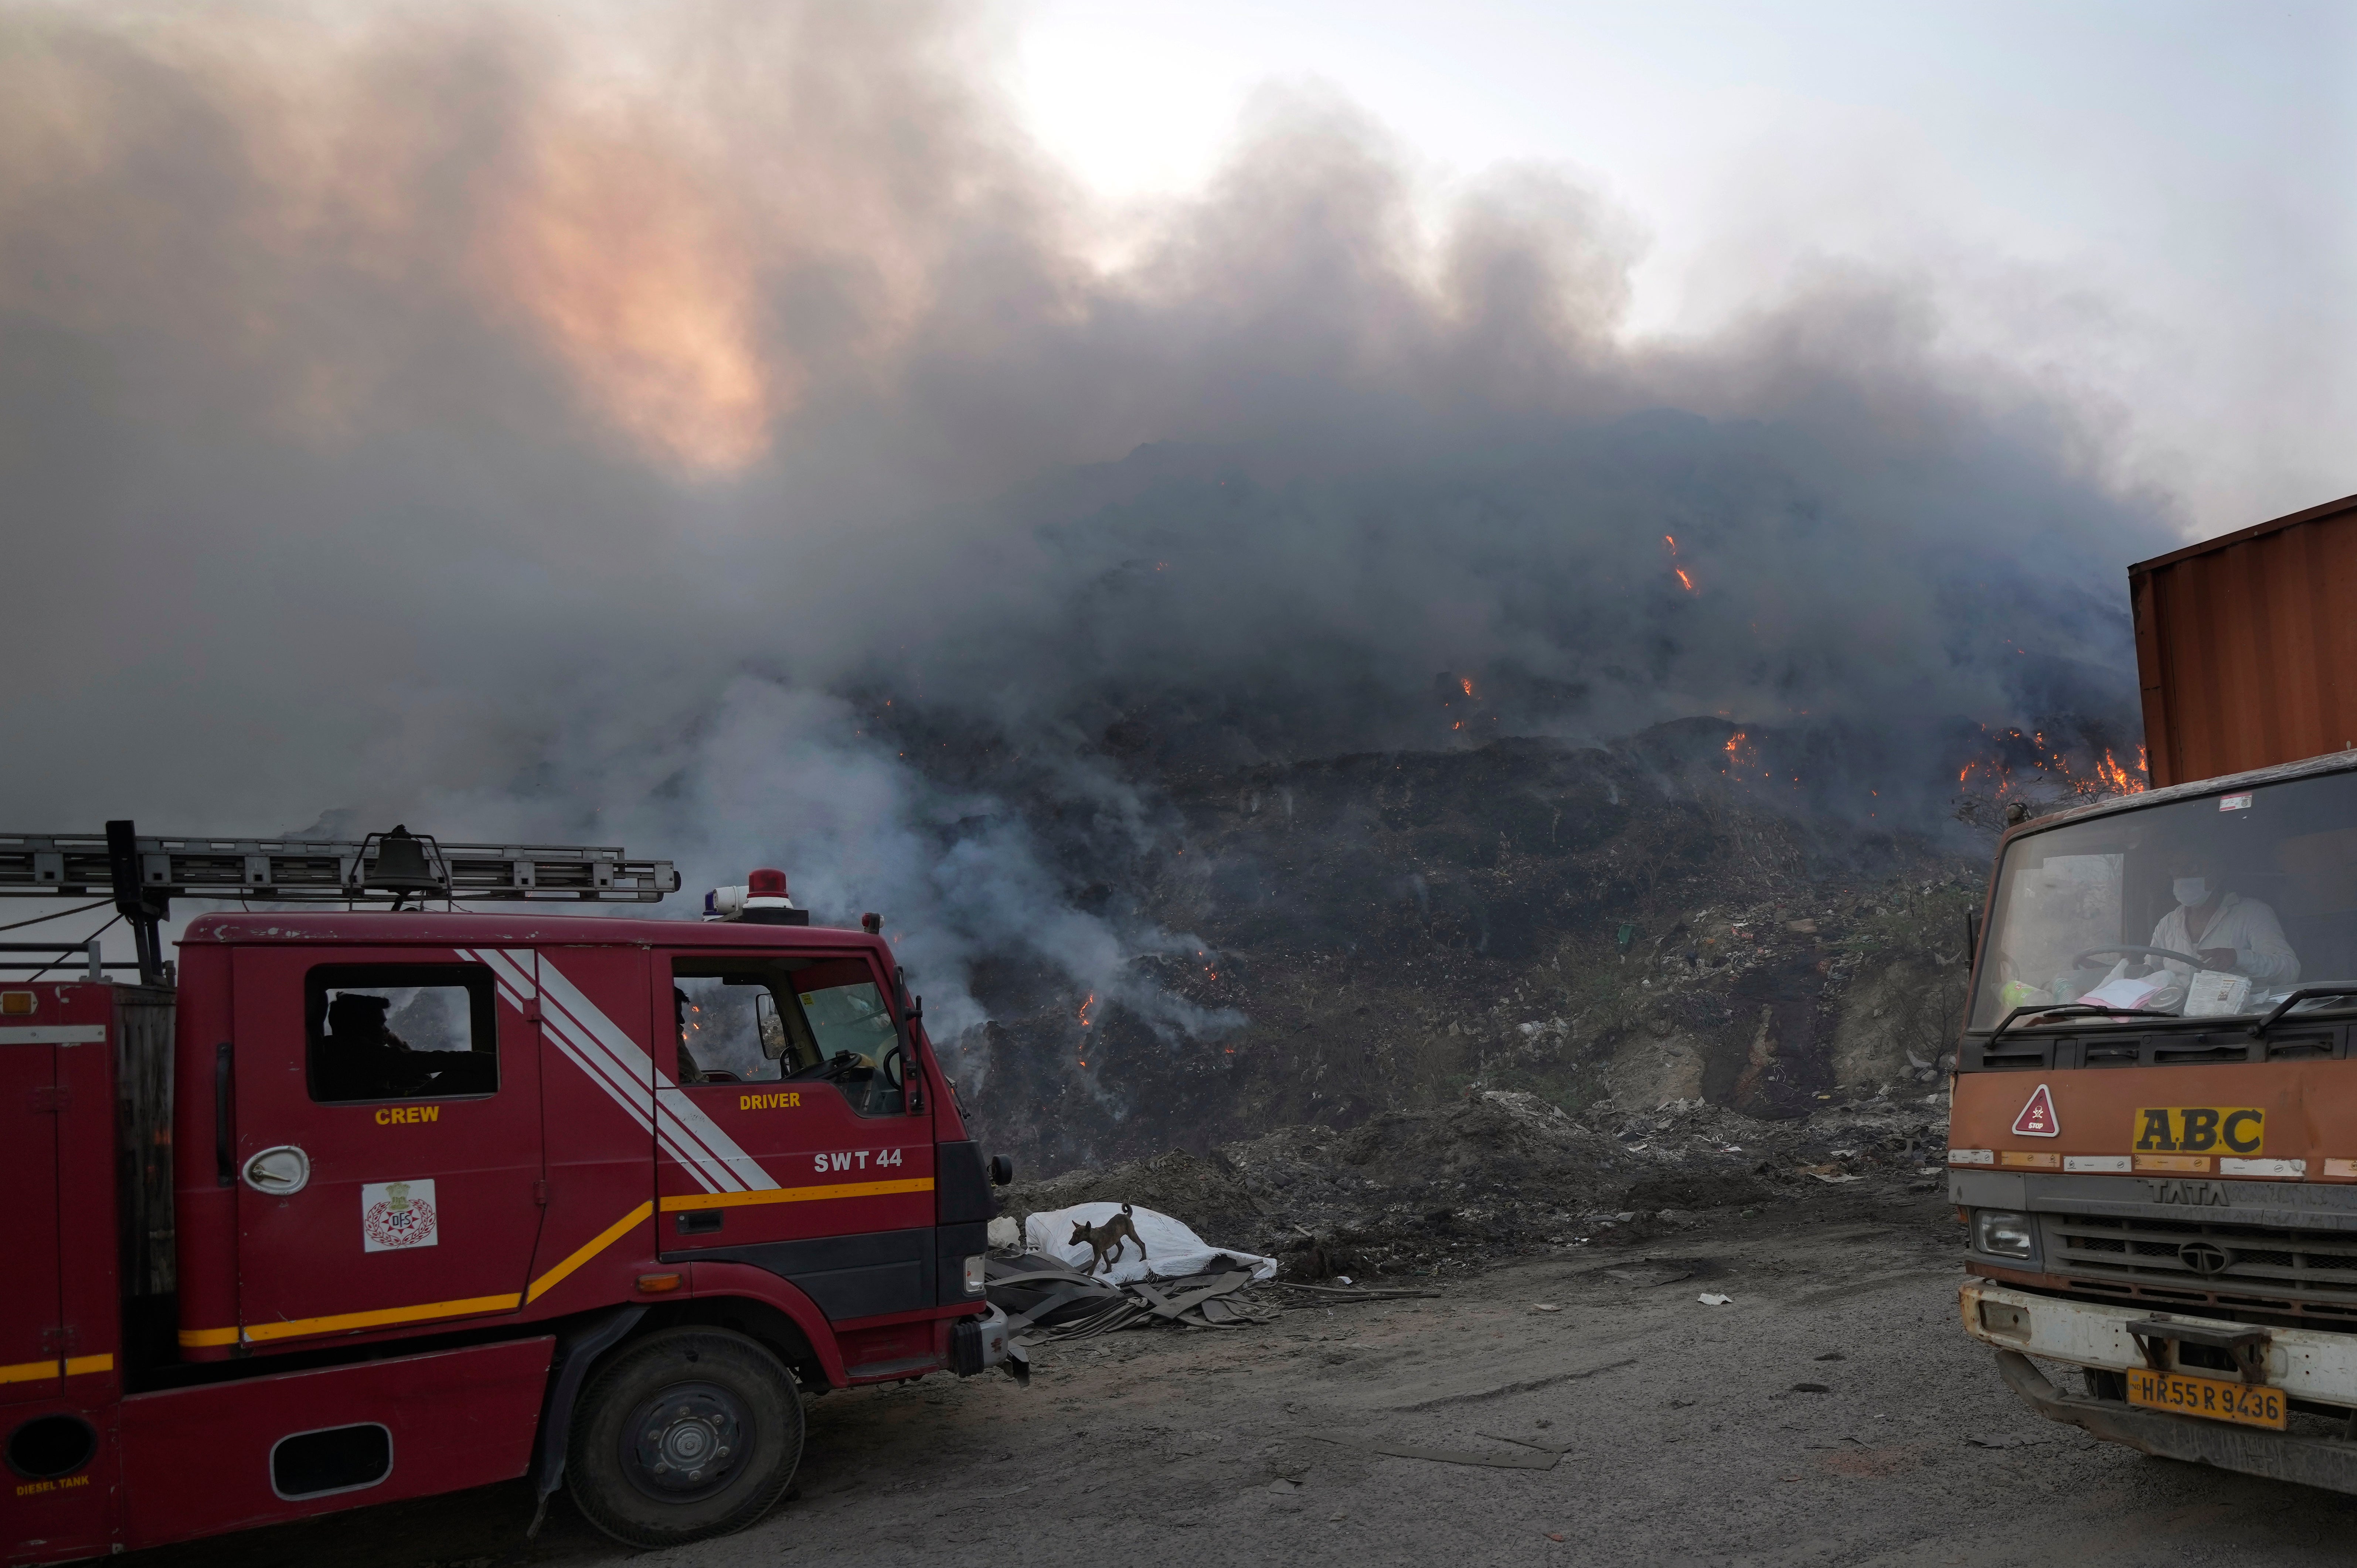 A Delhi fire tender waits during a fire at the Bhalswa landfill in New Delhi, India, Wednesday, April 27, 2022. (Photo: Manish Swarup, AP)